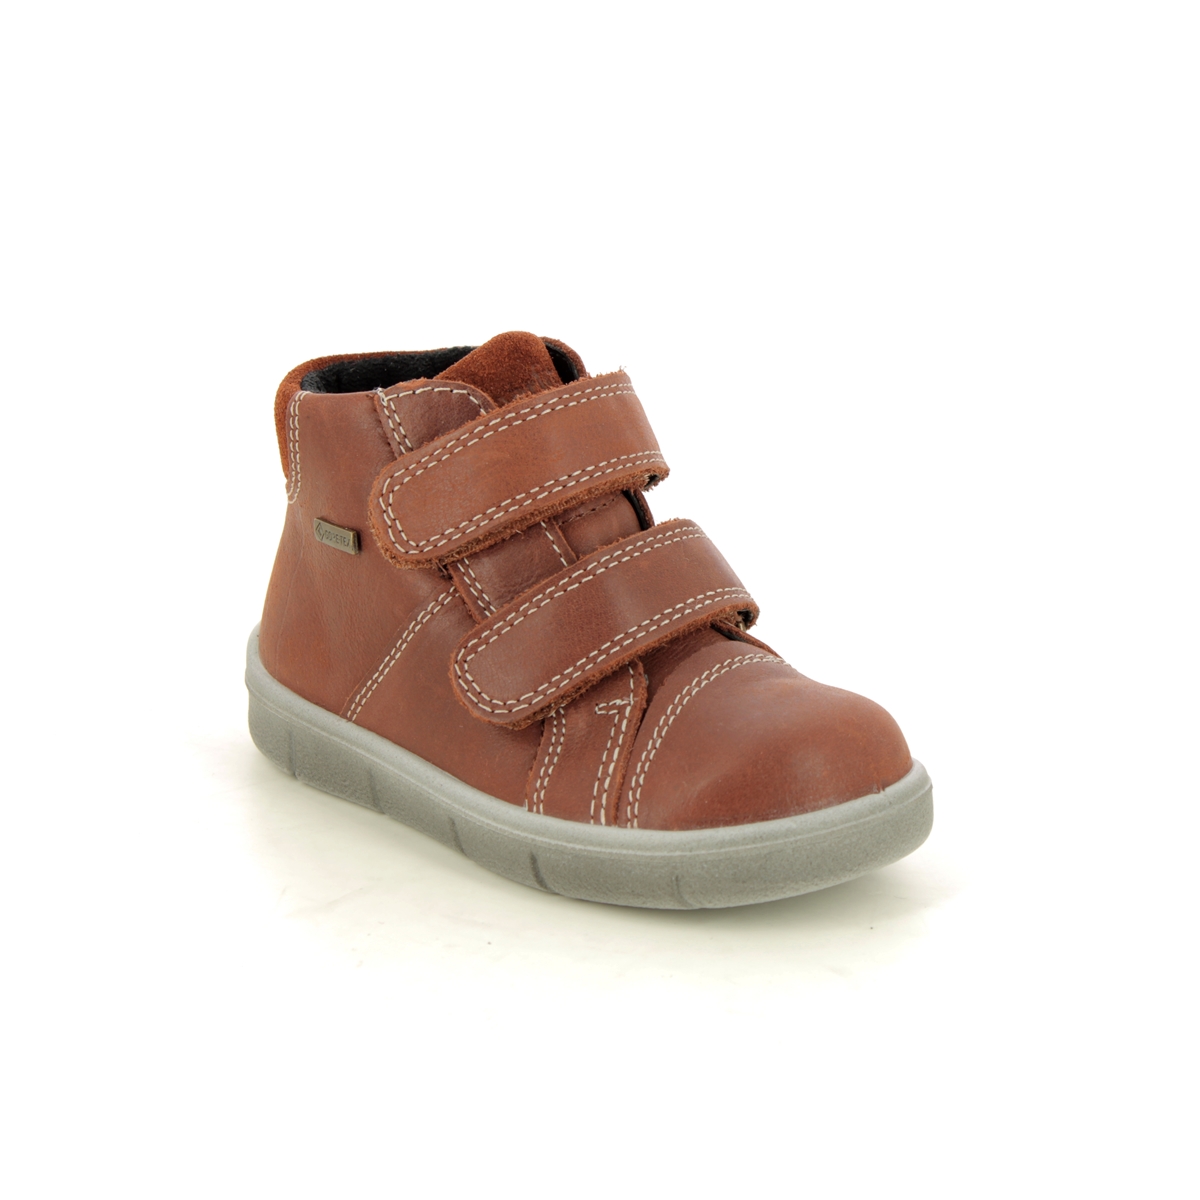 Superfit Ulli 2V Gtx Tan Leather  Kids Toddler Boys Boots 0800423-3000 In Size 21 In Plain Tan Leather